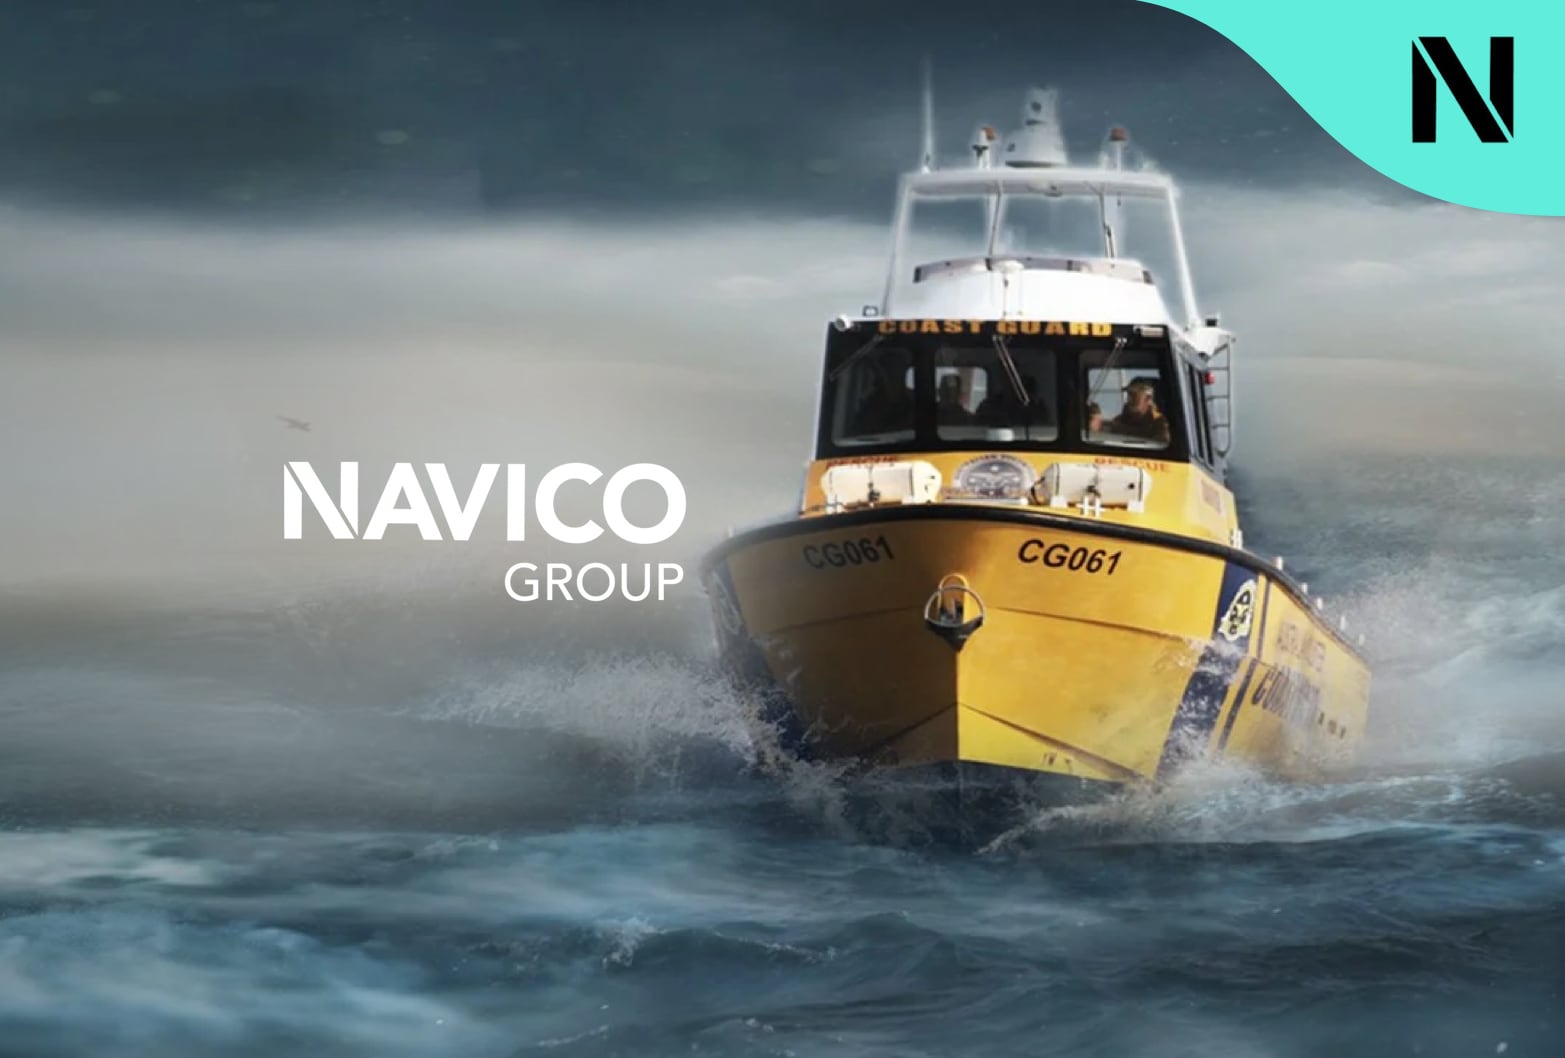 Creating a flexible newsletter templating system for Navico